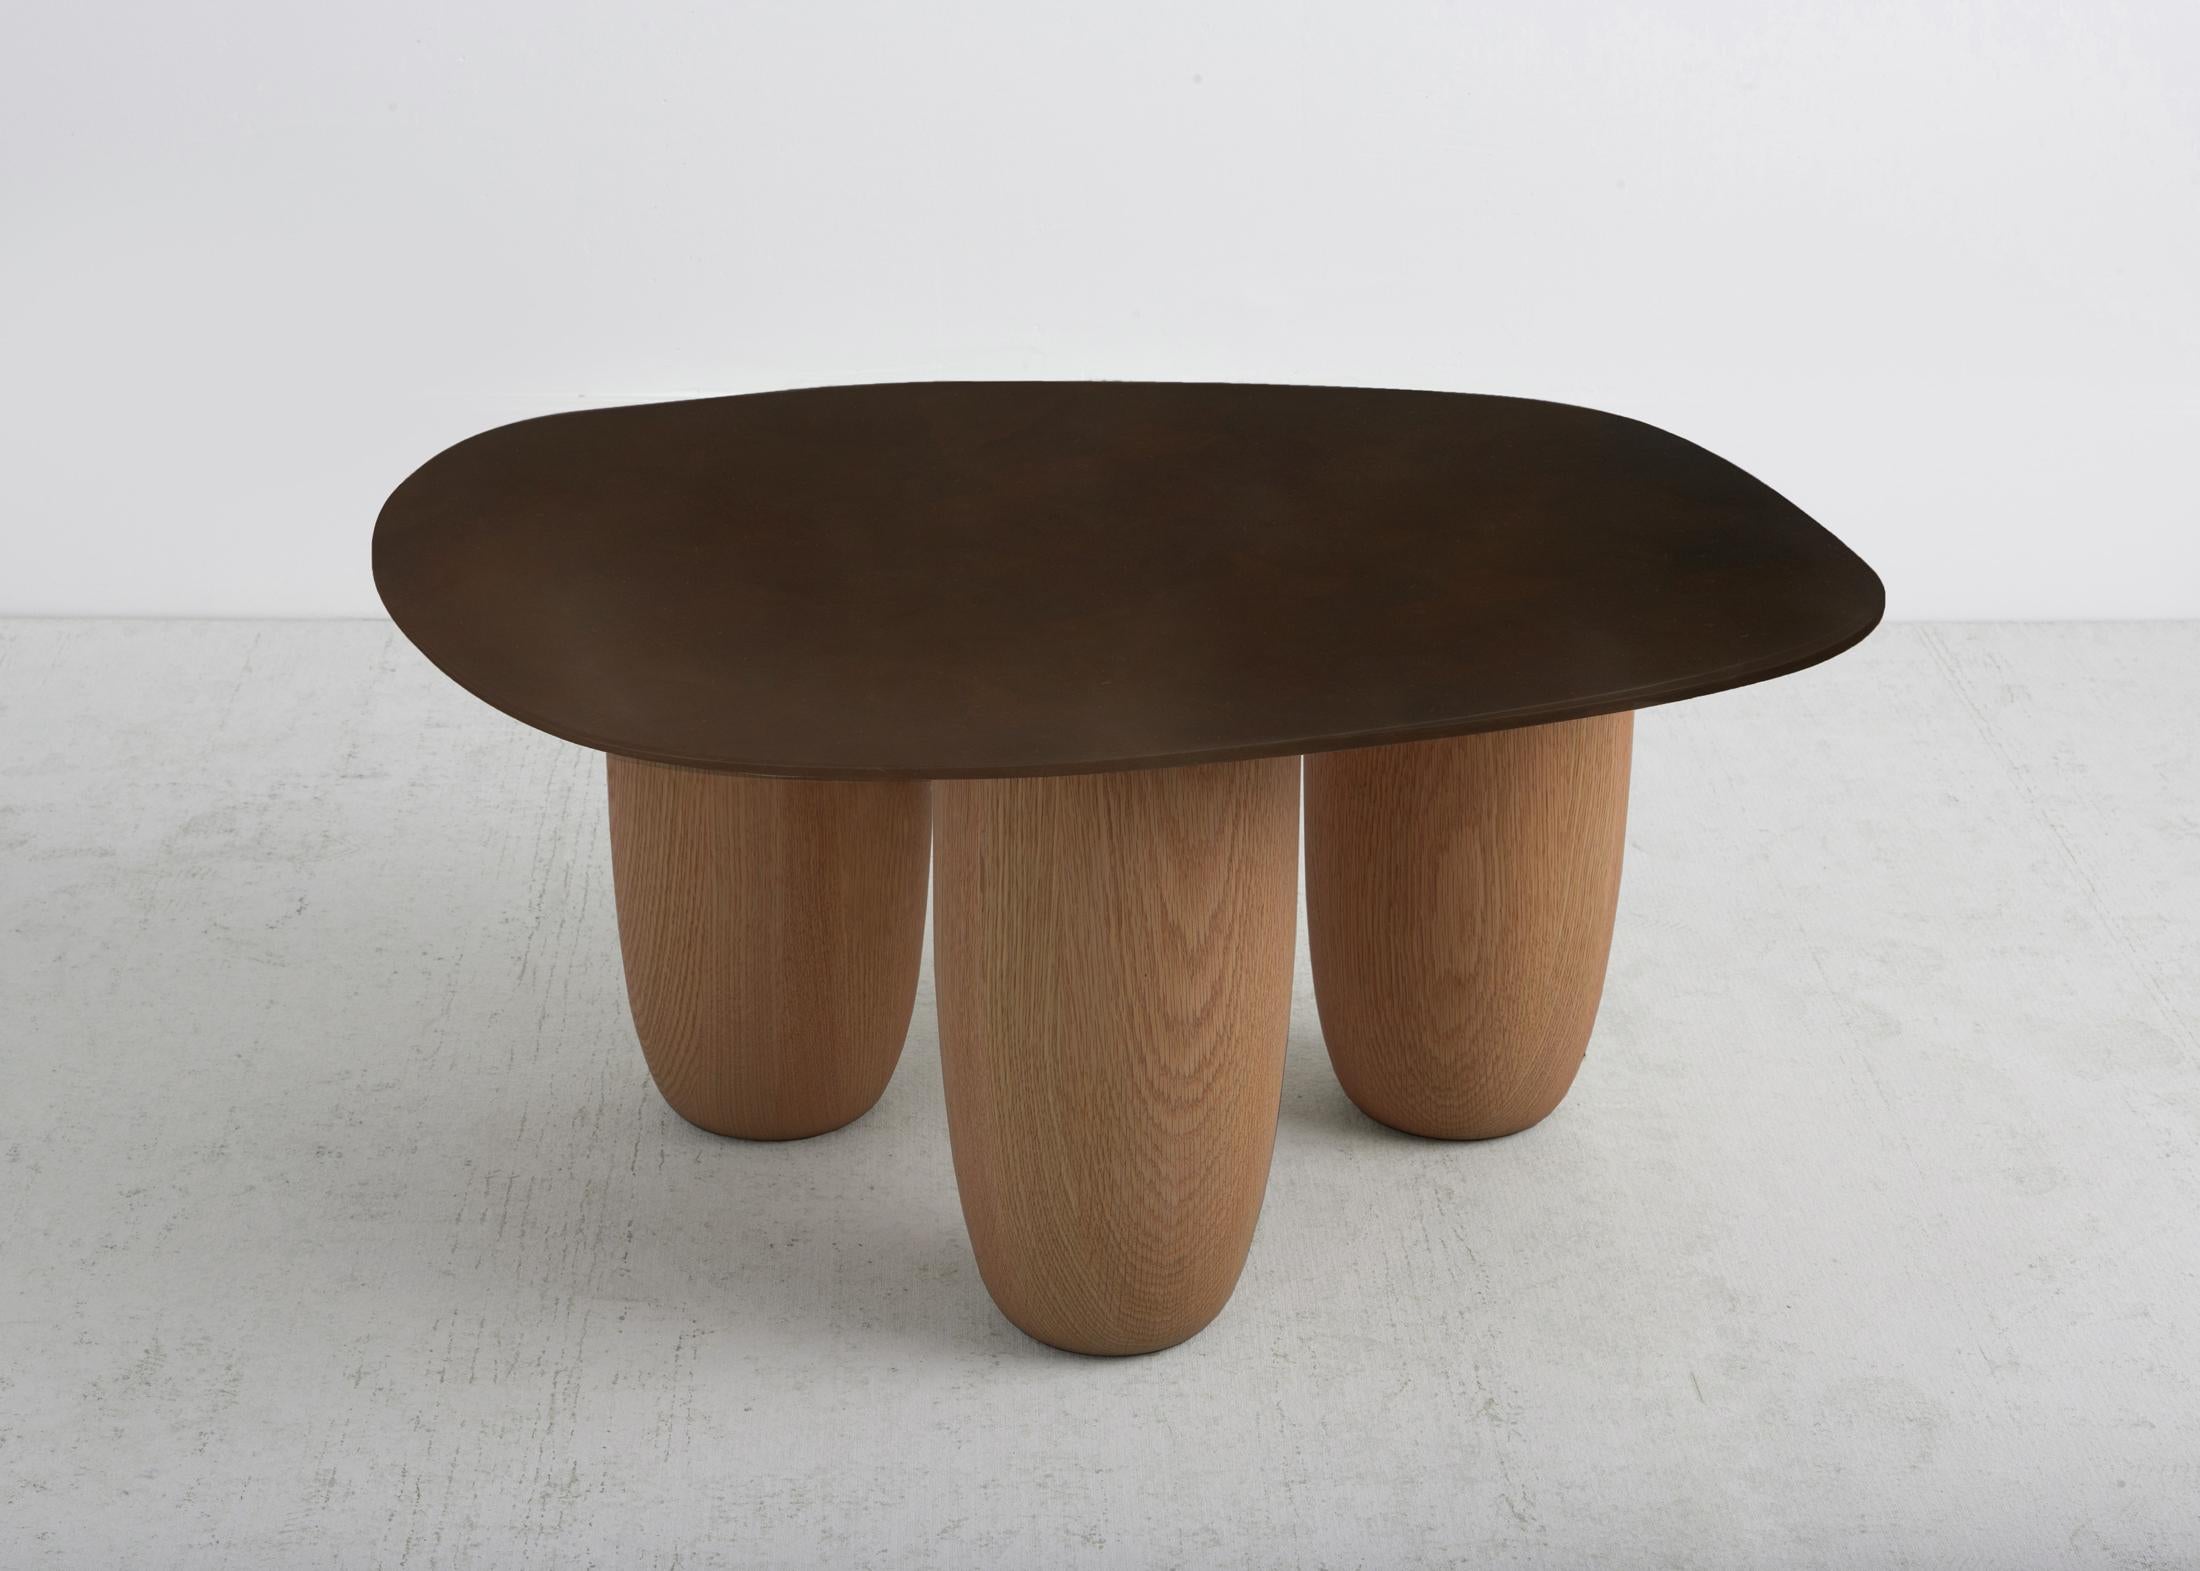 Patinated Minimalist Low Tables Japanese Brown Patina Steel with Oak Legs Vivian Carbonell For Sale